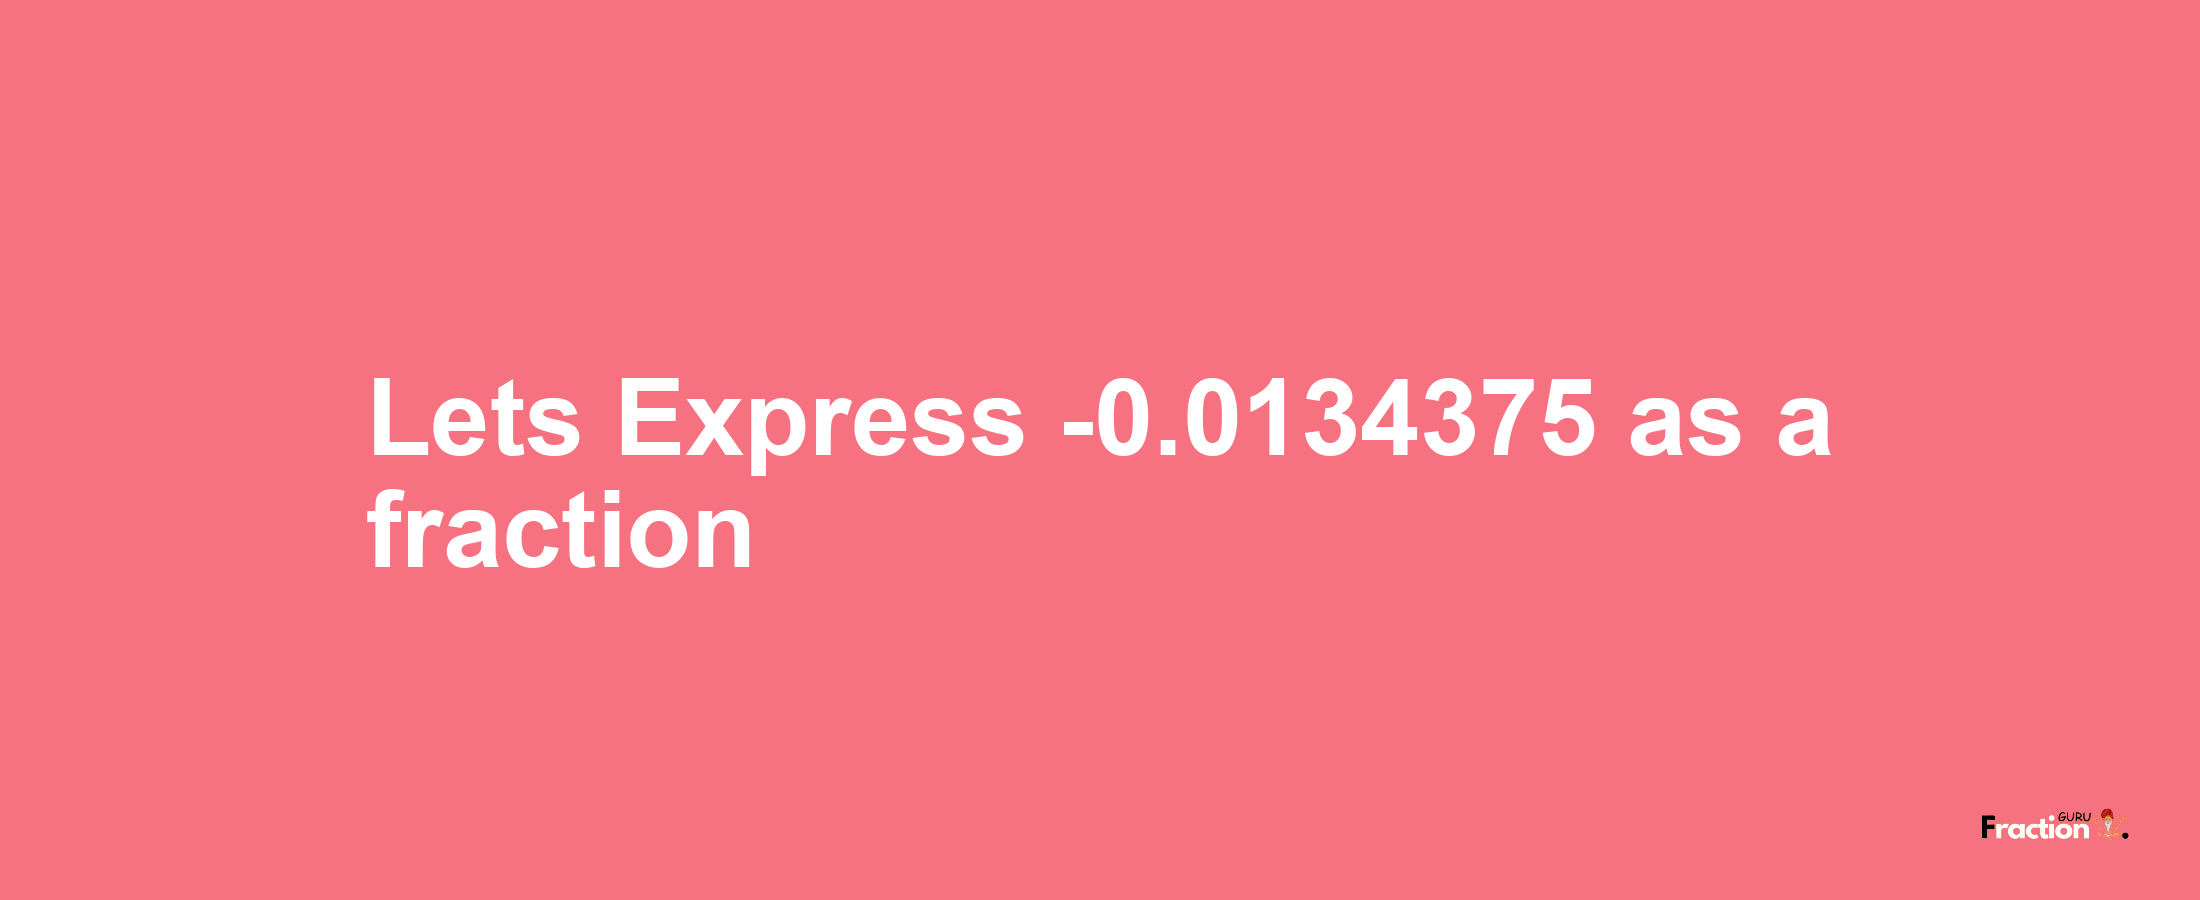 Lets Express -0.0134375 as afraction